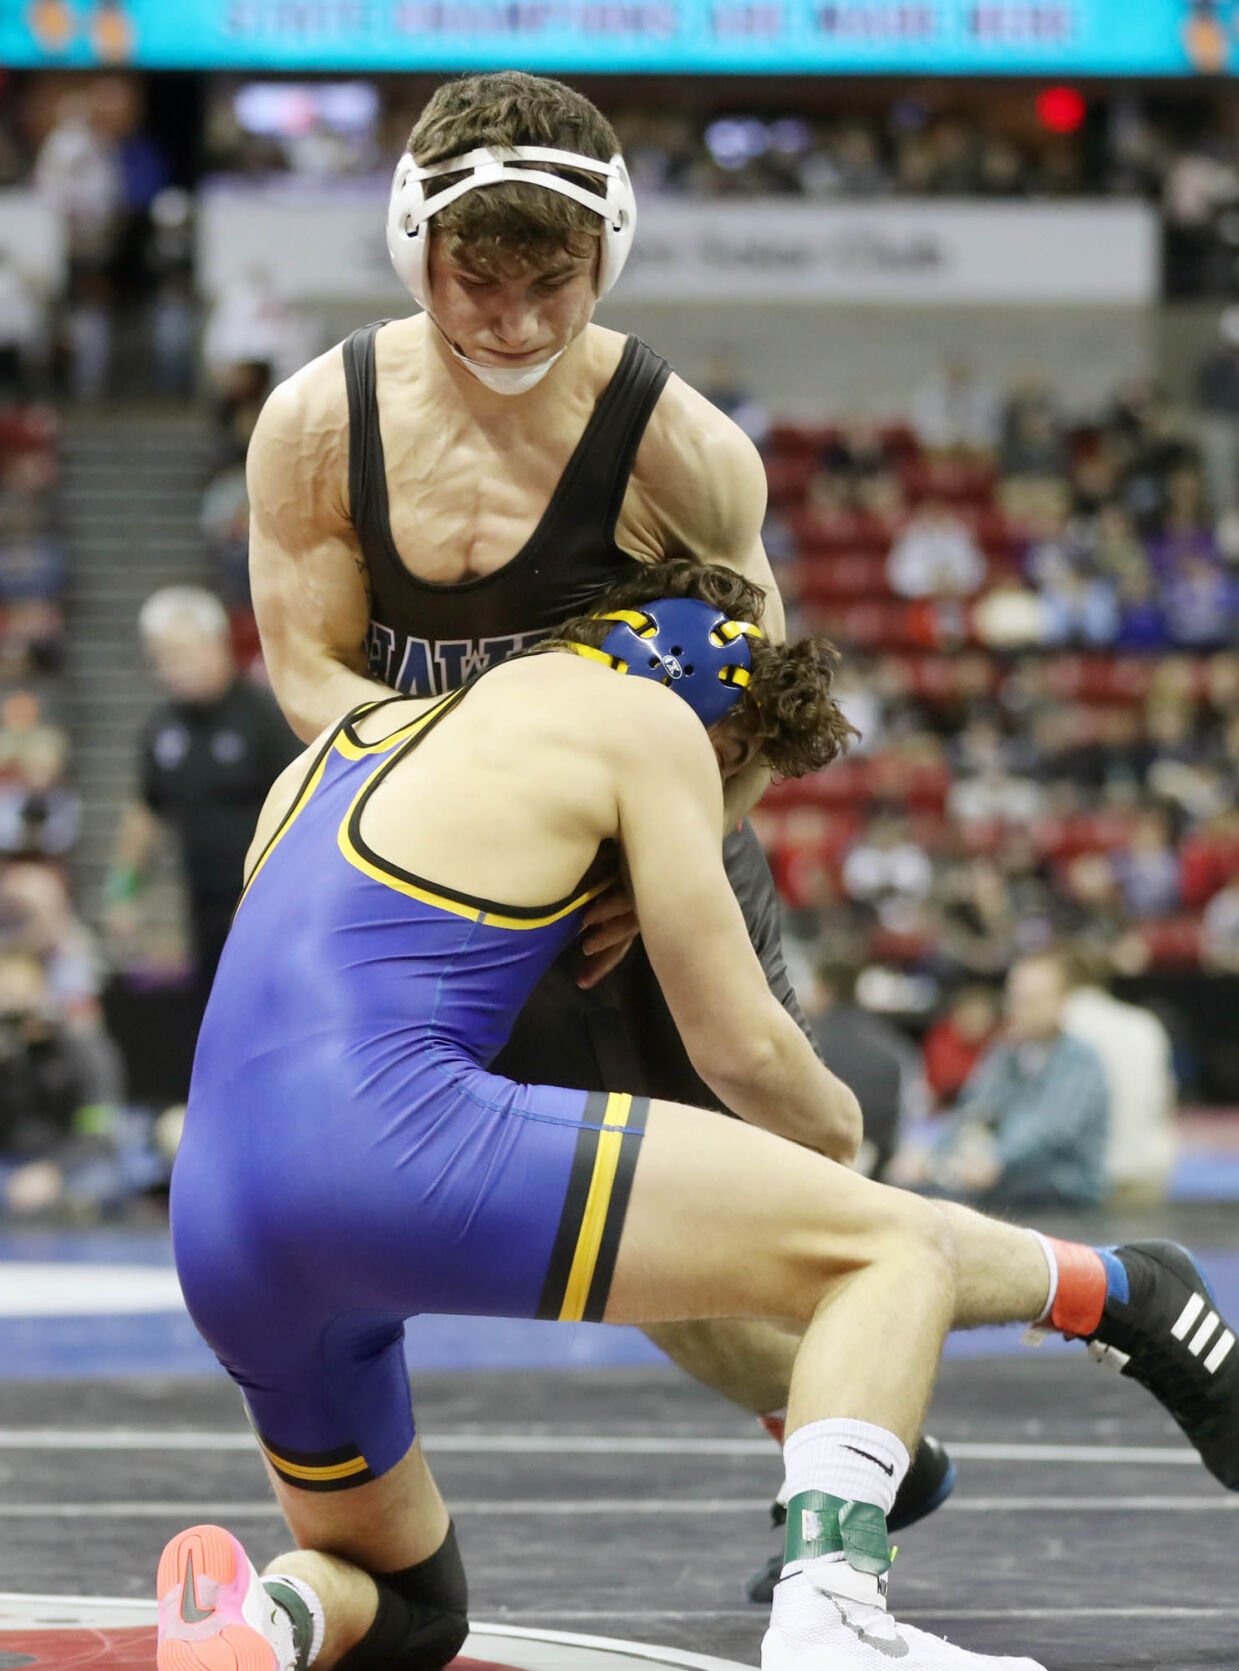 Ray Gulmatico Secures Victory in 157-Pound Division Semifinals at WIAA Wrestling Tournament